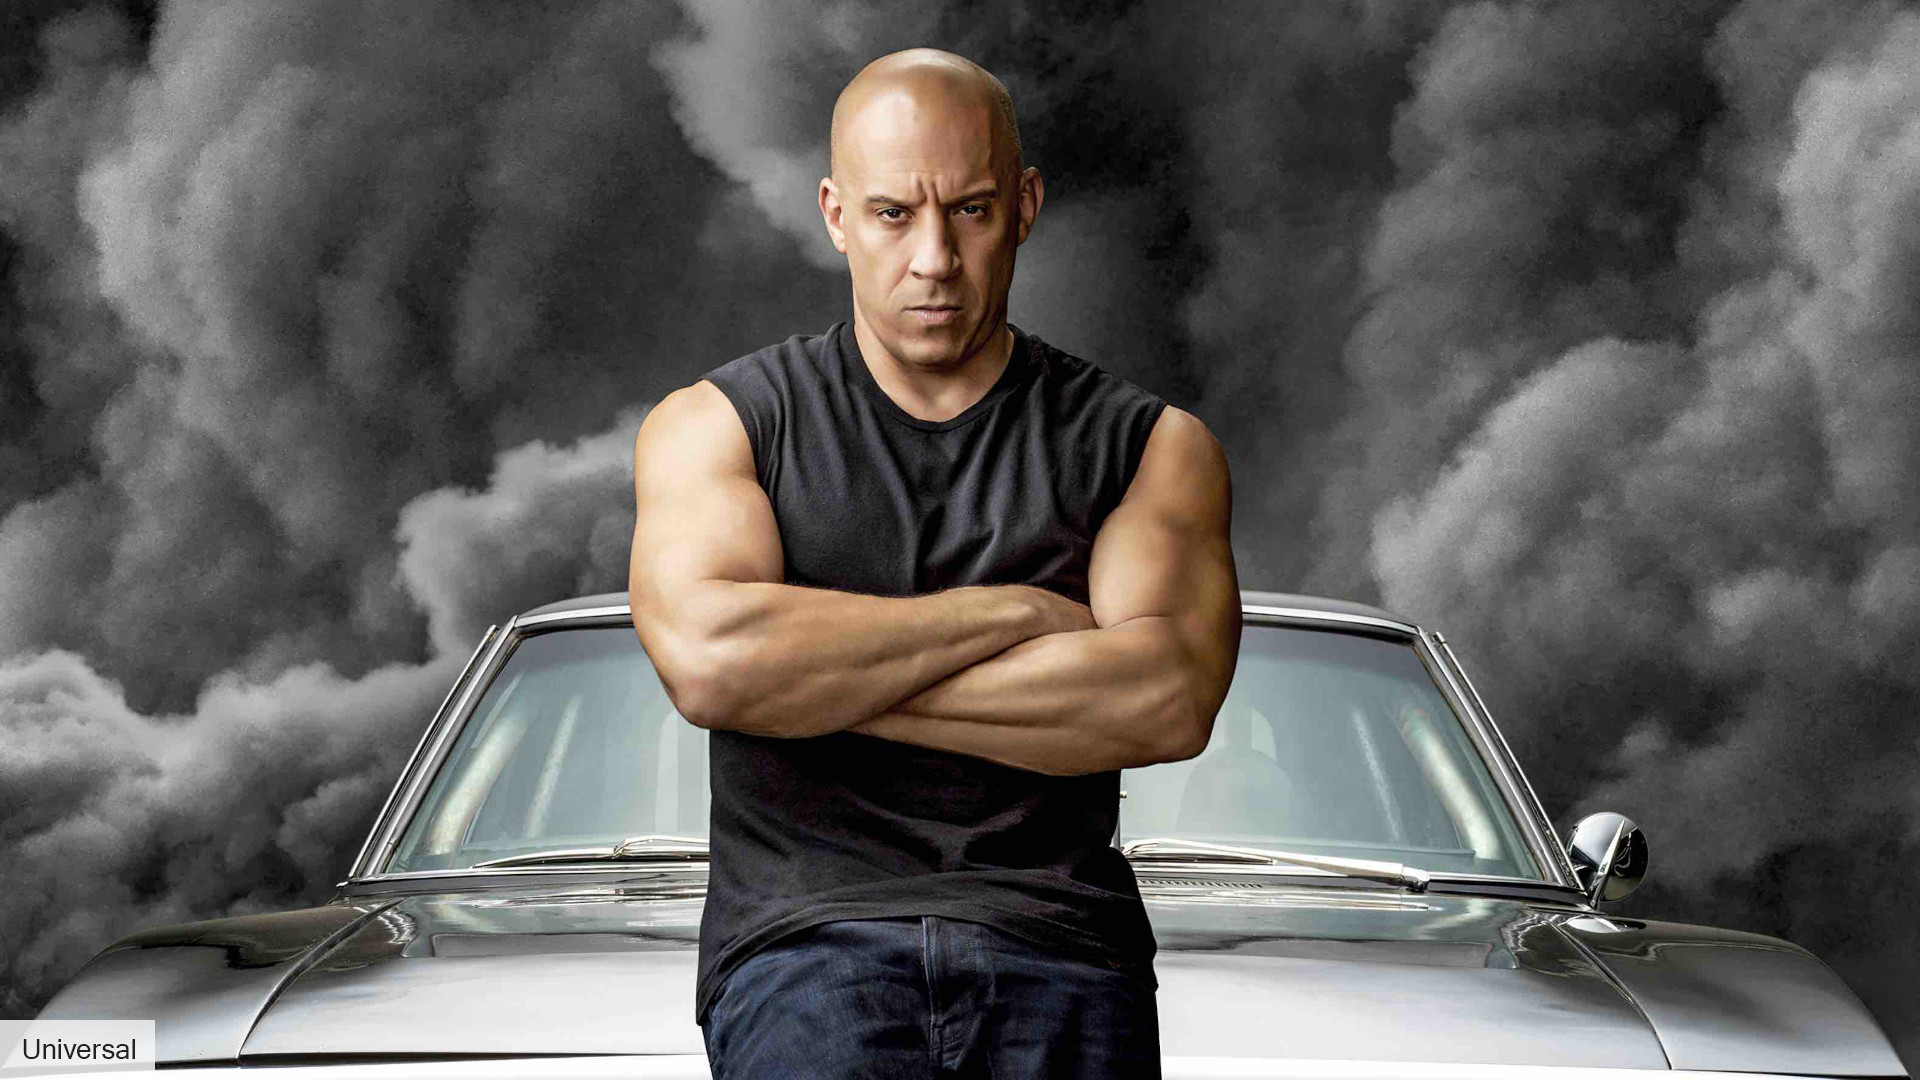 Fast and Furious 10 trailer coming soon, teases Vin Diesel | The Digital Fix